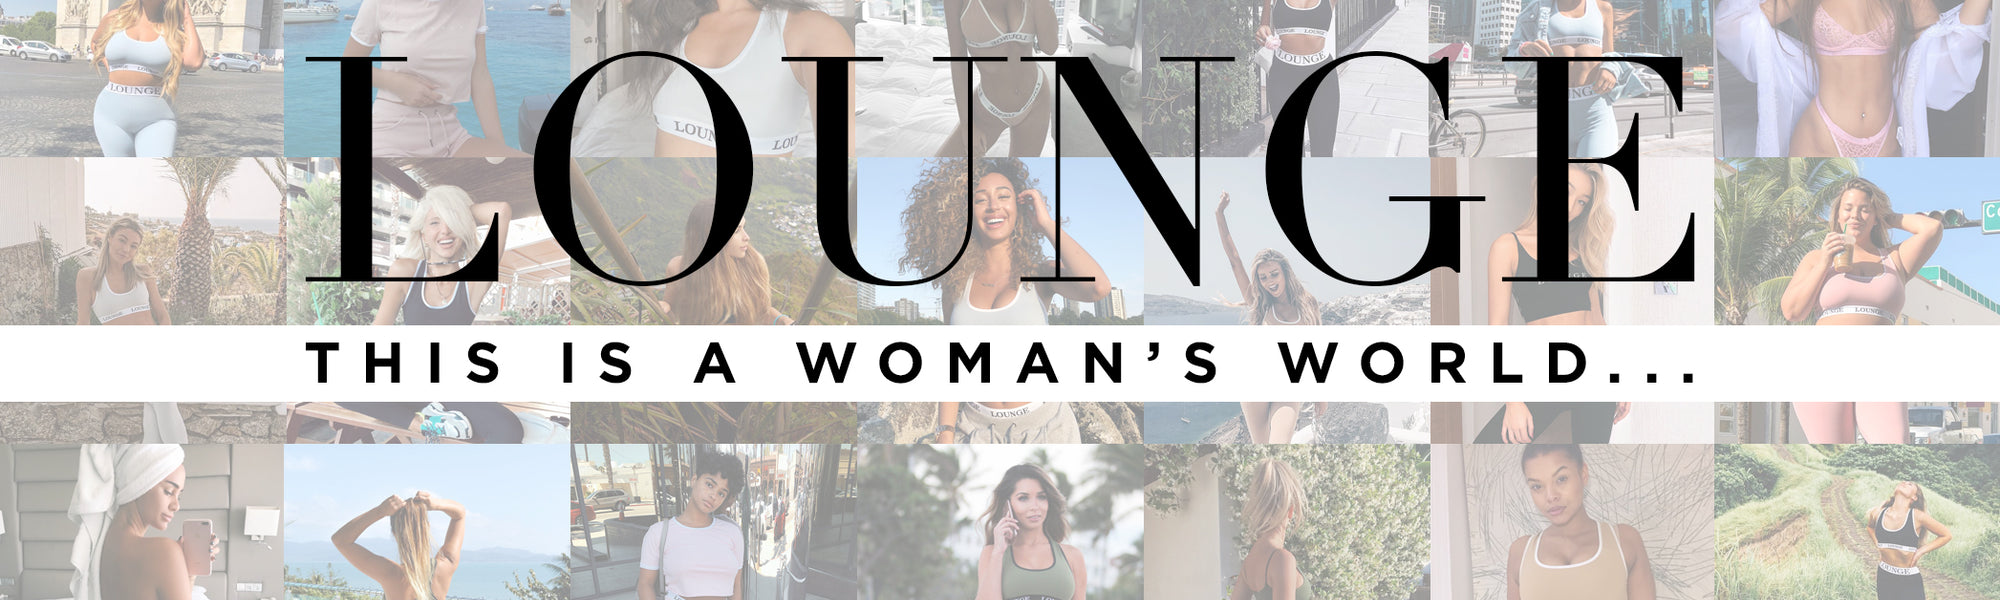 This is a Woman's World|https://loungeunderwear.com/blogs/news/this-is-a-womans-world-we-need-you